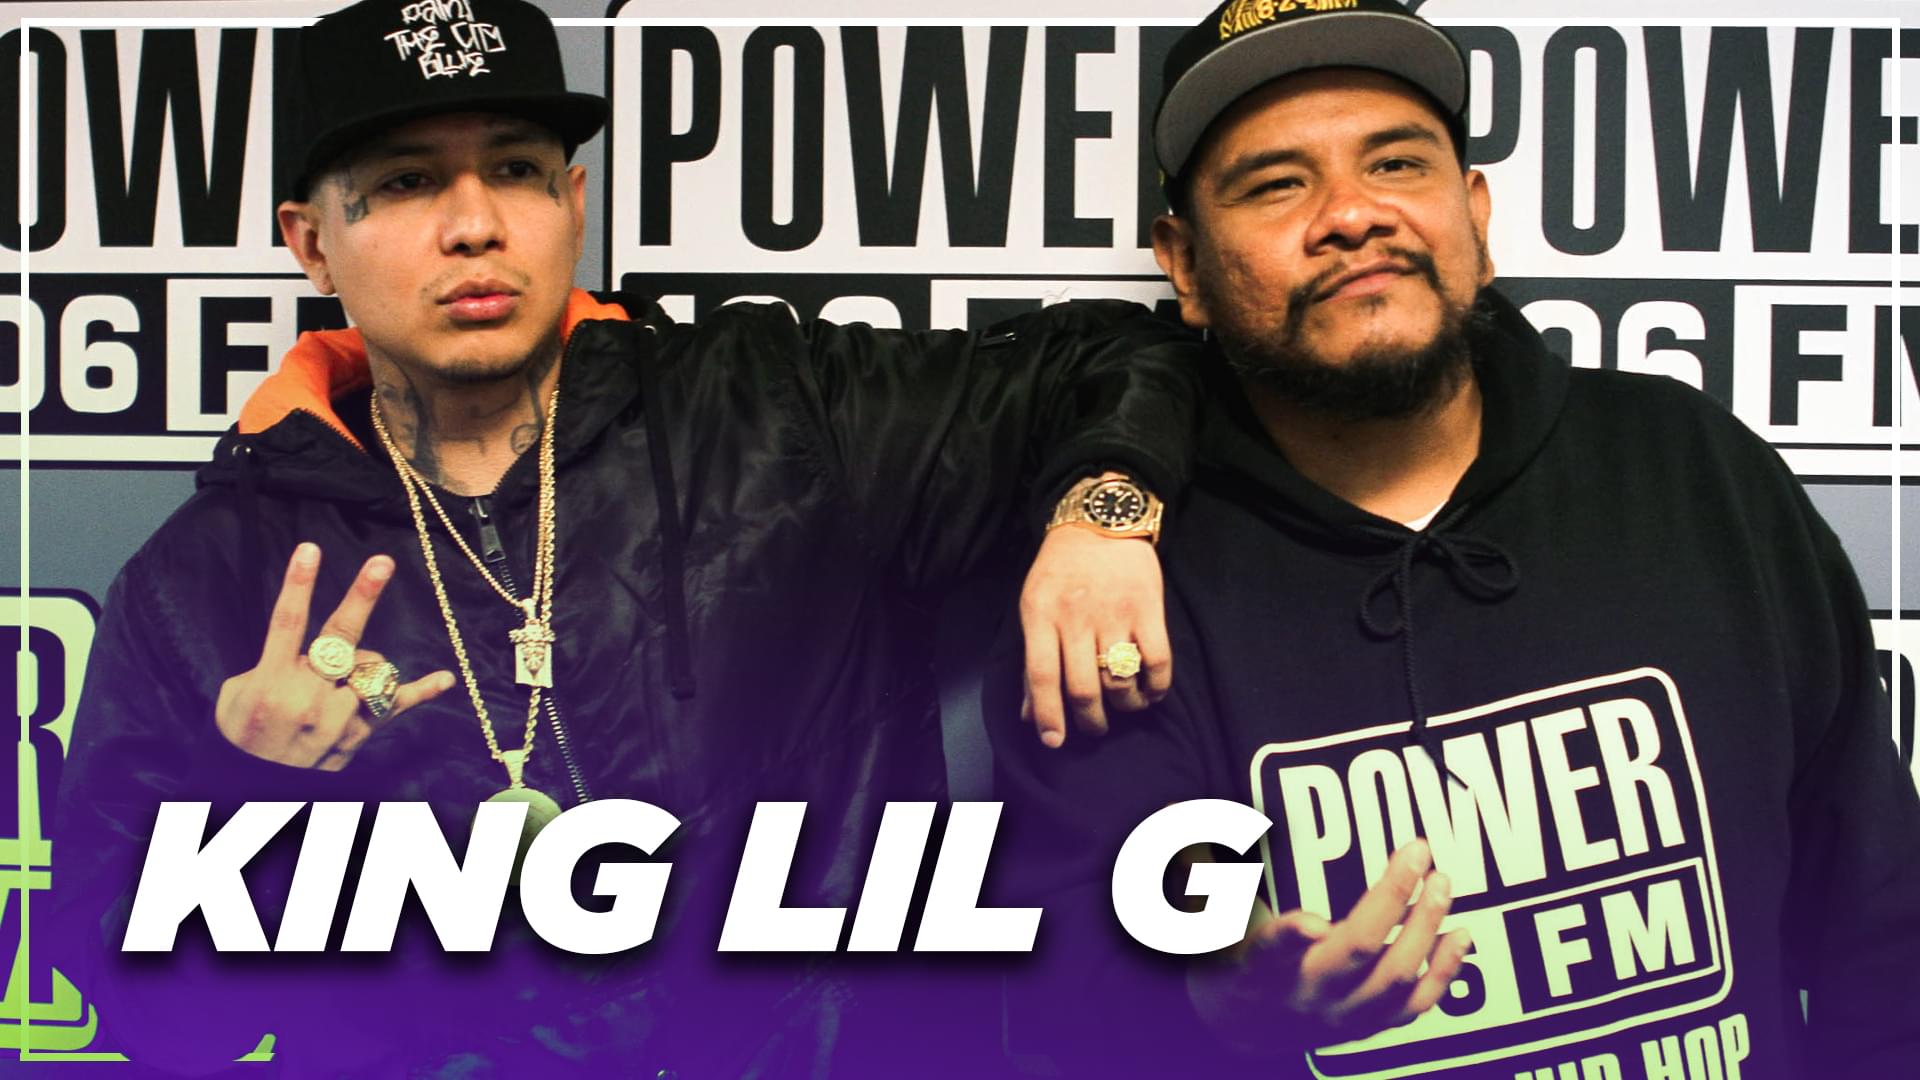 King Lil G Talks Latinos in Hip-Hop, His Wife Managing His Career, First Daughter On The Way + MORE!